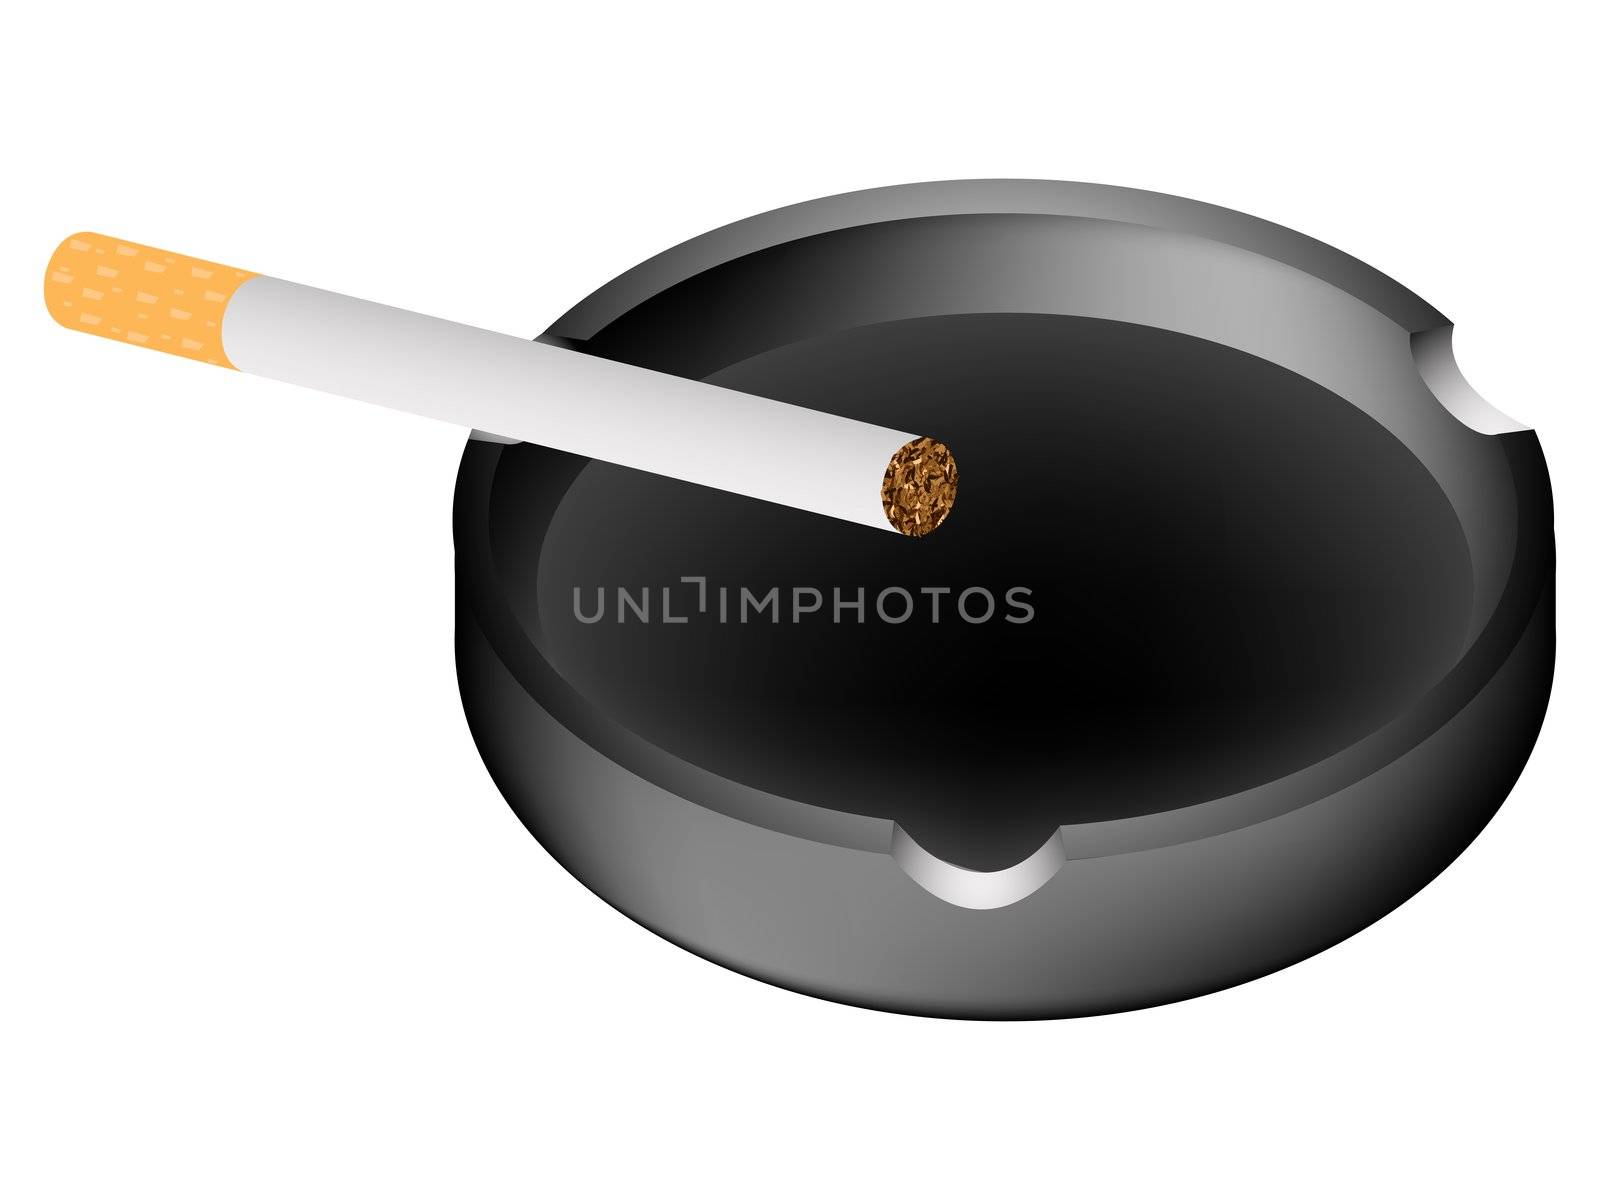 ashtray and cigarette against white background, abstract vector art illustration